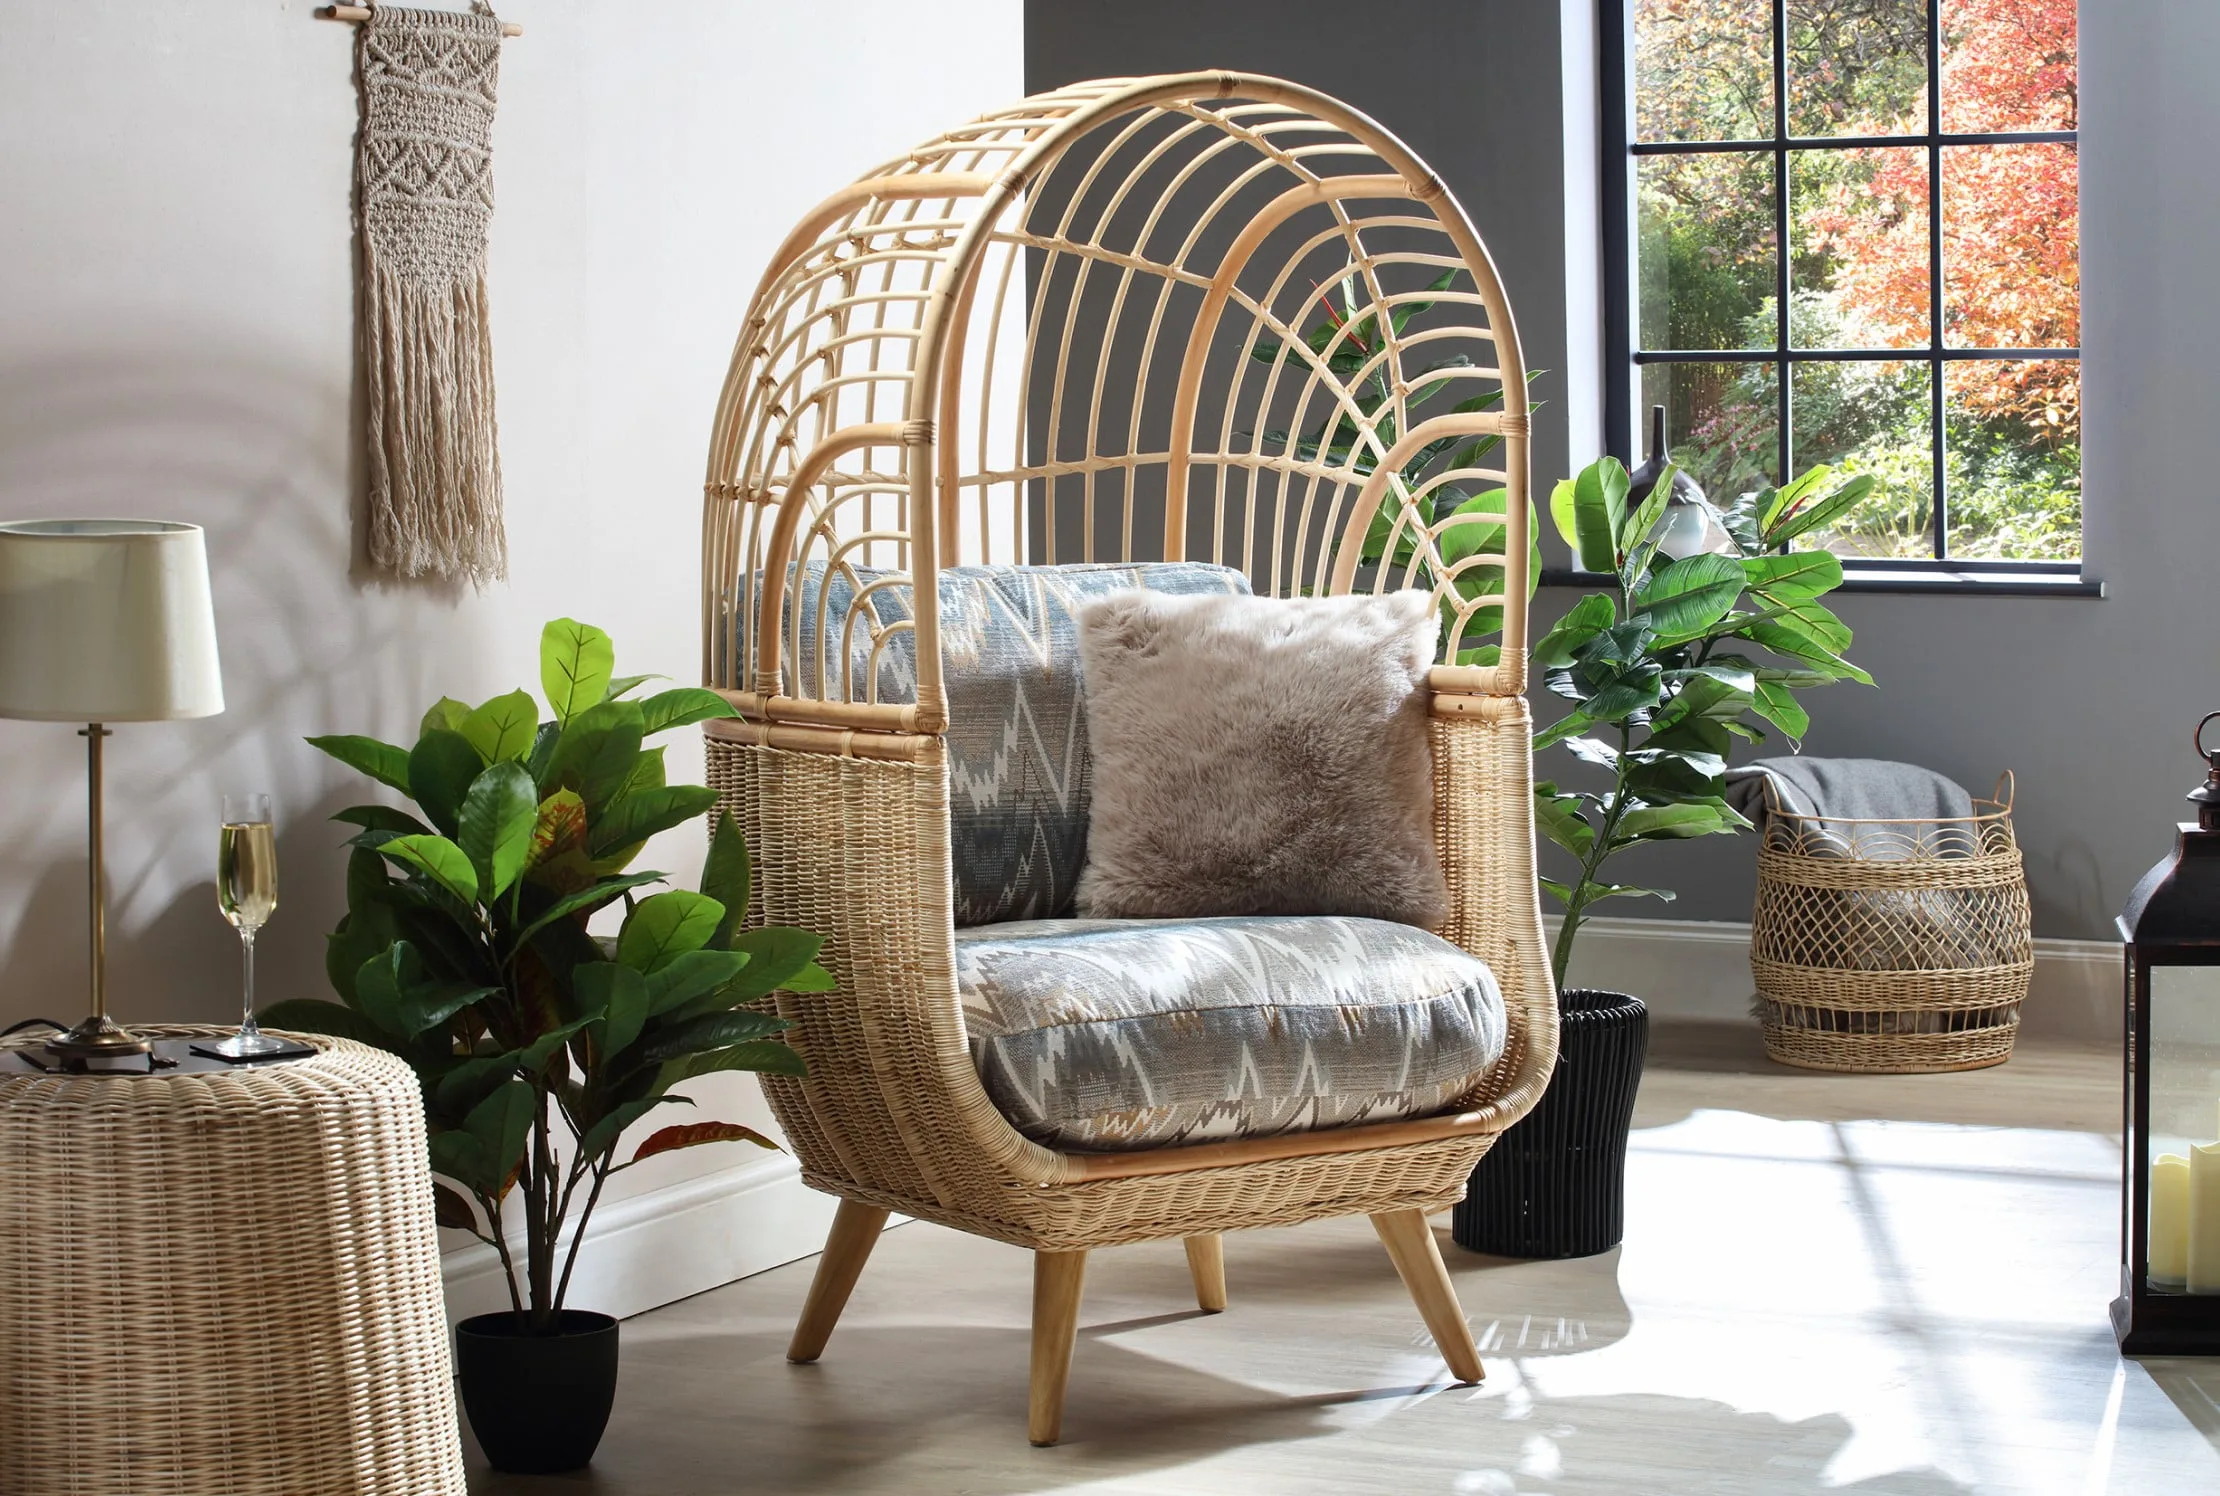 £574. 99 smooth beigevelvet greenalpine this unique natural rattan cocoon chair provides a spacious seating area where you can relax in luxury. The high ceiling of the cane frame allows you to feel like you are in the outdoors and gives you a sense of a hanging egg chair whilst it also boasts a stunning wicker weave on the sides. It is beautifully hand-crafted and also comes in a sofa option. Part assembled – easy to screw in legs and seat hood 4 sturdy and supportive legs handmade in the uk cushions with alpine pattern fabric (65% polyester & 35% viscose – dry clean only) natural rattan – hand-crafted with sustainable farming dimensions: h152cm x w83cm x d83cm – floor to seat: 54cm – seat depth: 51cm in stock | delivered within 7 days natural rattan cocoon chair in alpine cushion quantity 1 add to basket v12 finance calculator please choose your deposit percentage: - select -* please choose your package plan: - select -* sku: 202310-2 categories: wicker chairs, wicker indoor